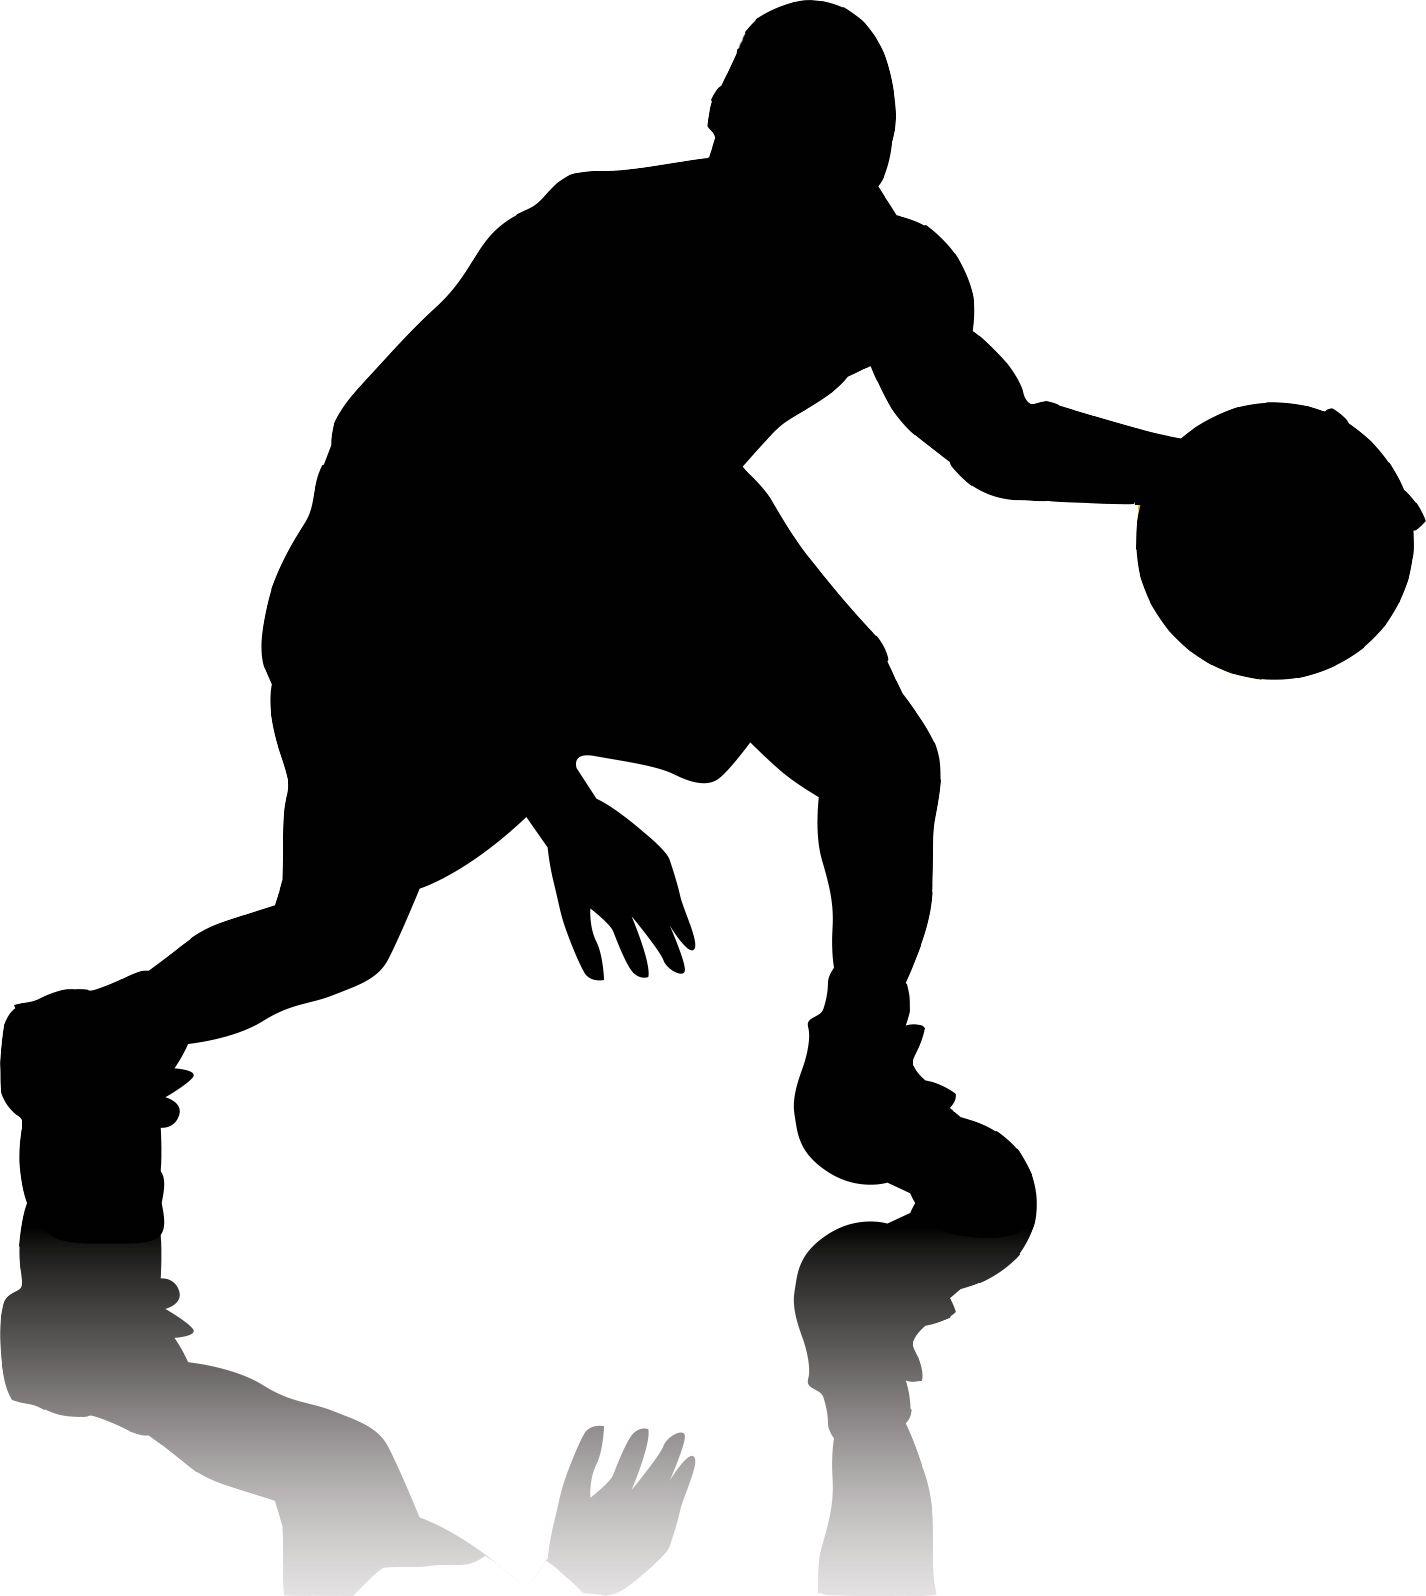 Basketball Player Logo - Free Basketball Outline, Download Free Clip Art, Free Clip Art on ...